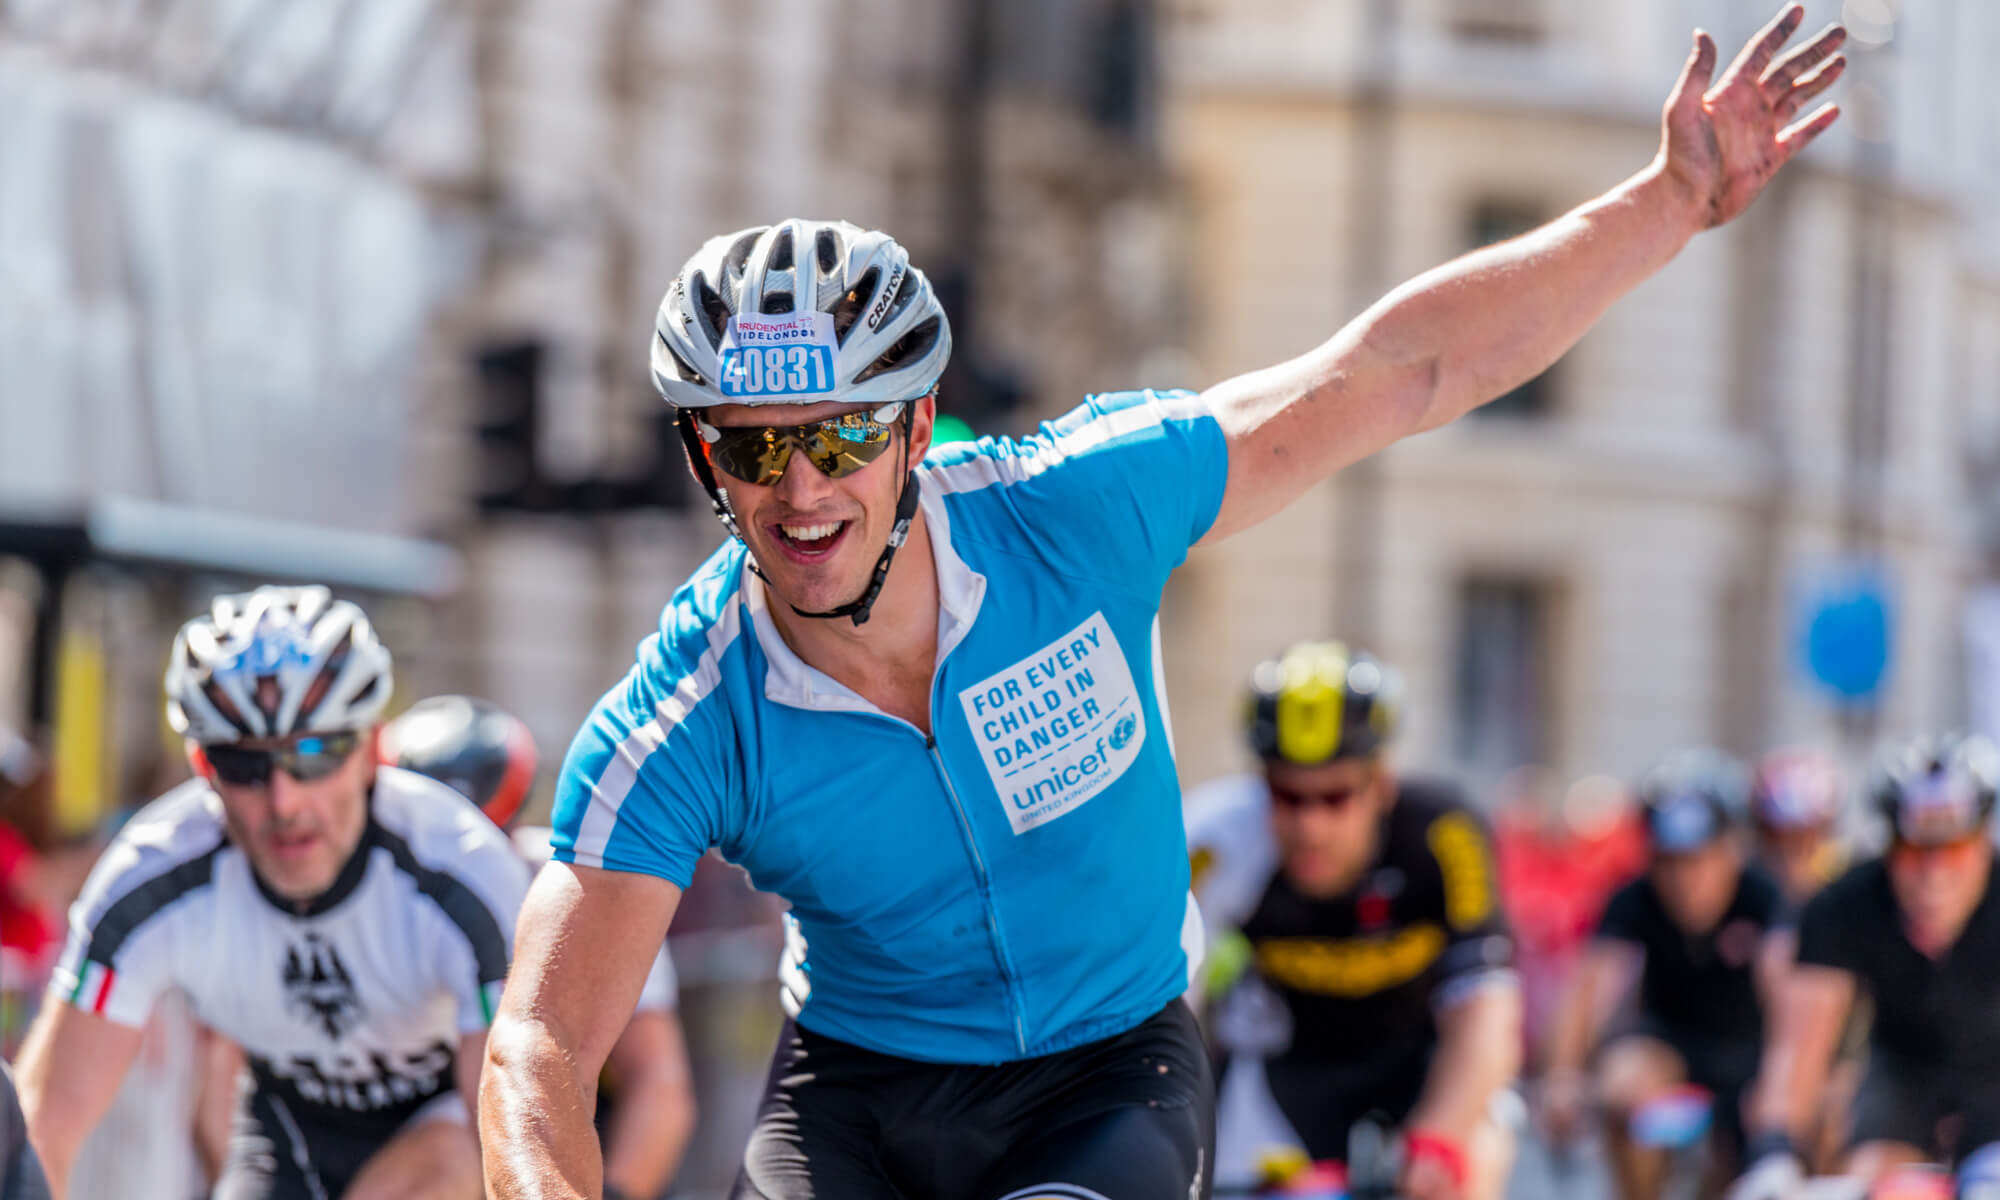 Sign up for a charity cycling event with Team Unicef